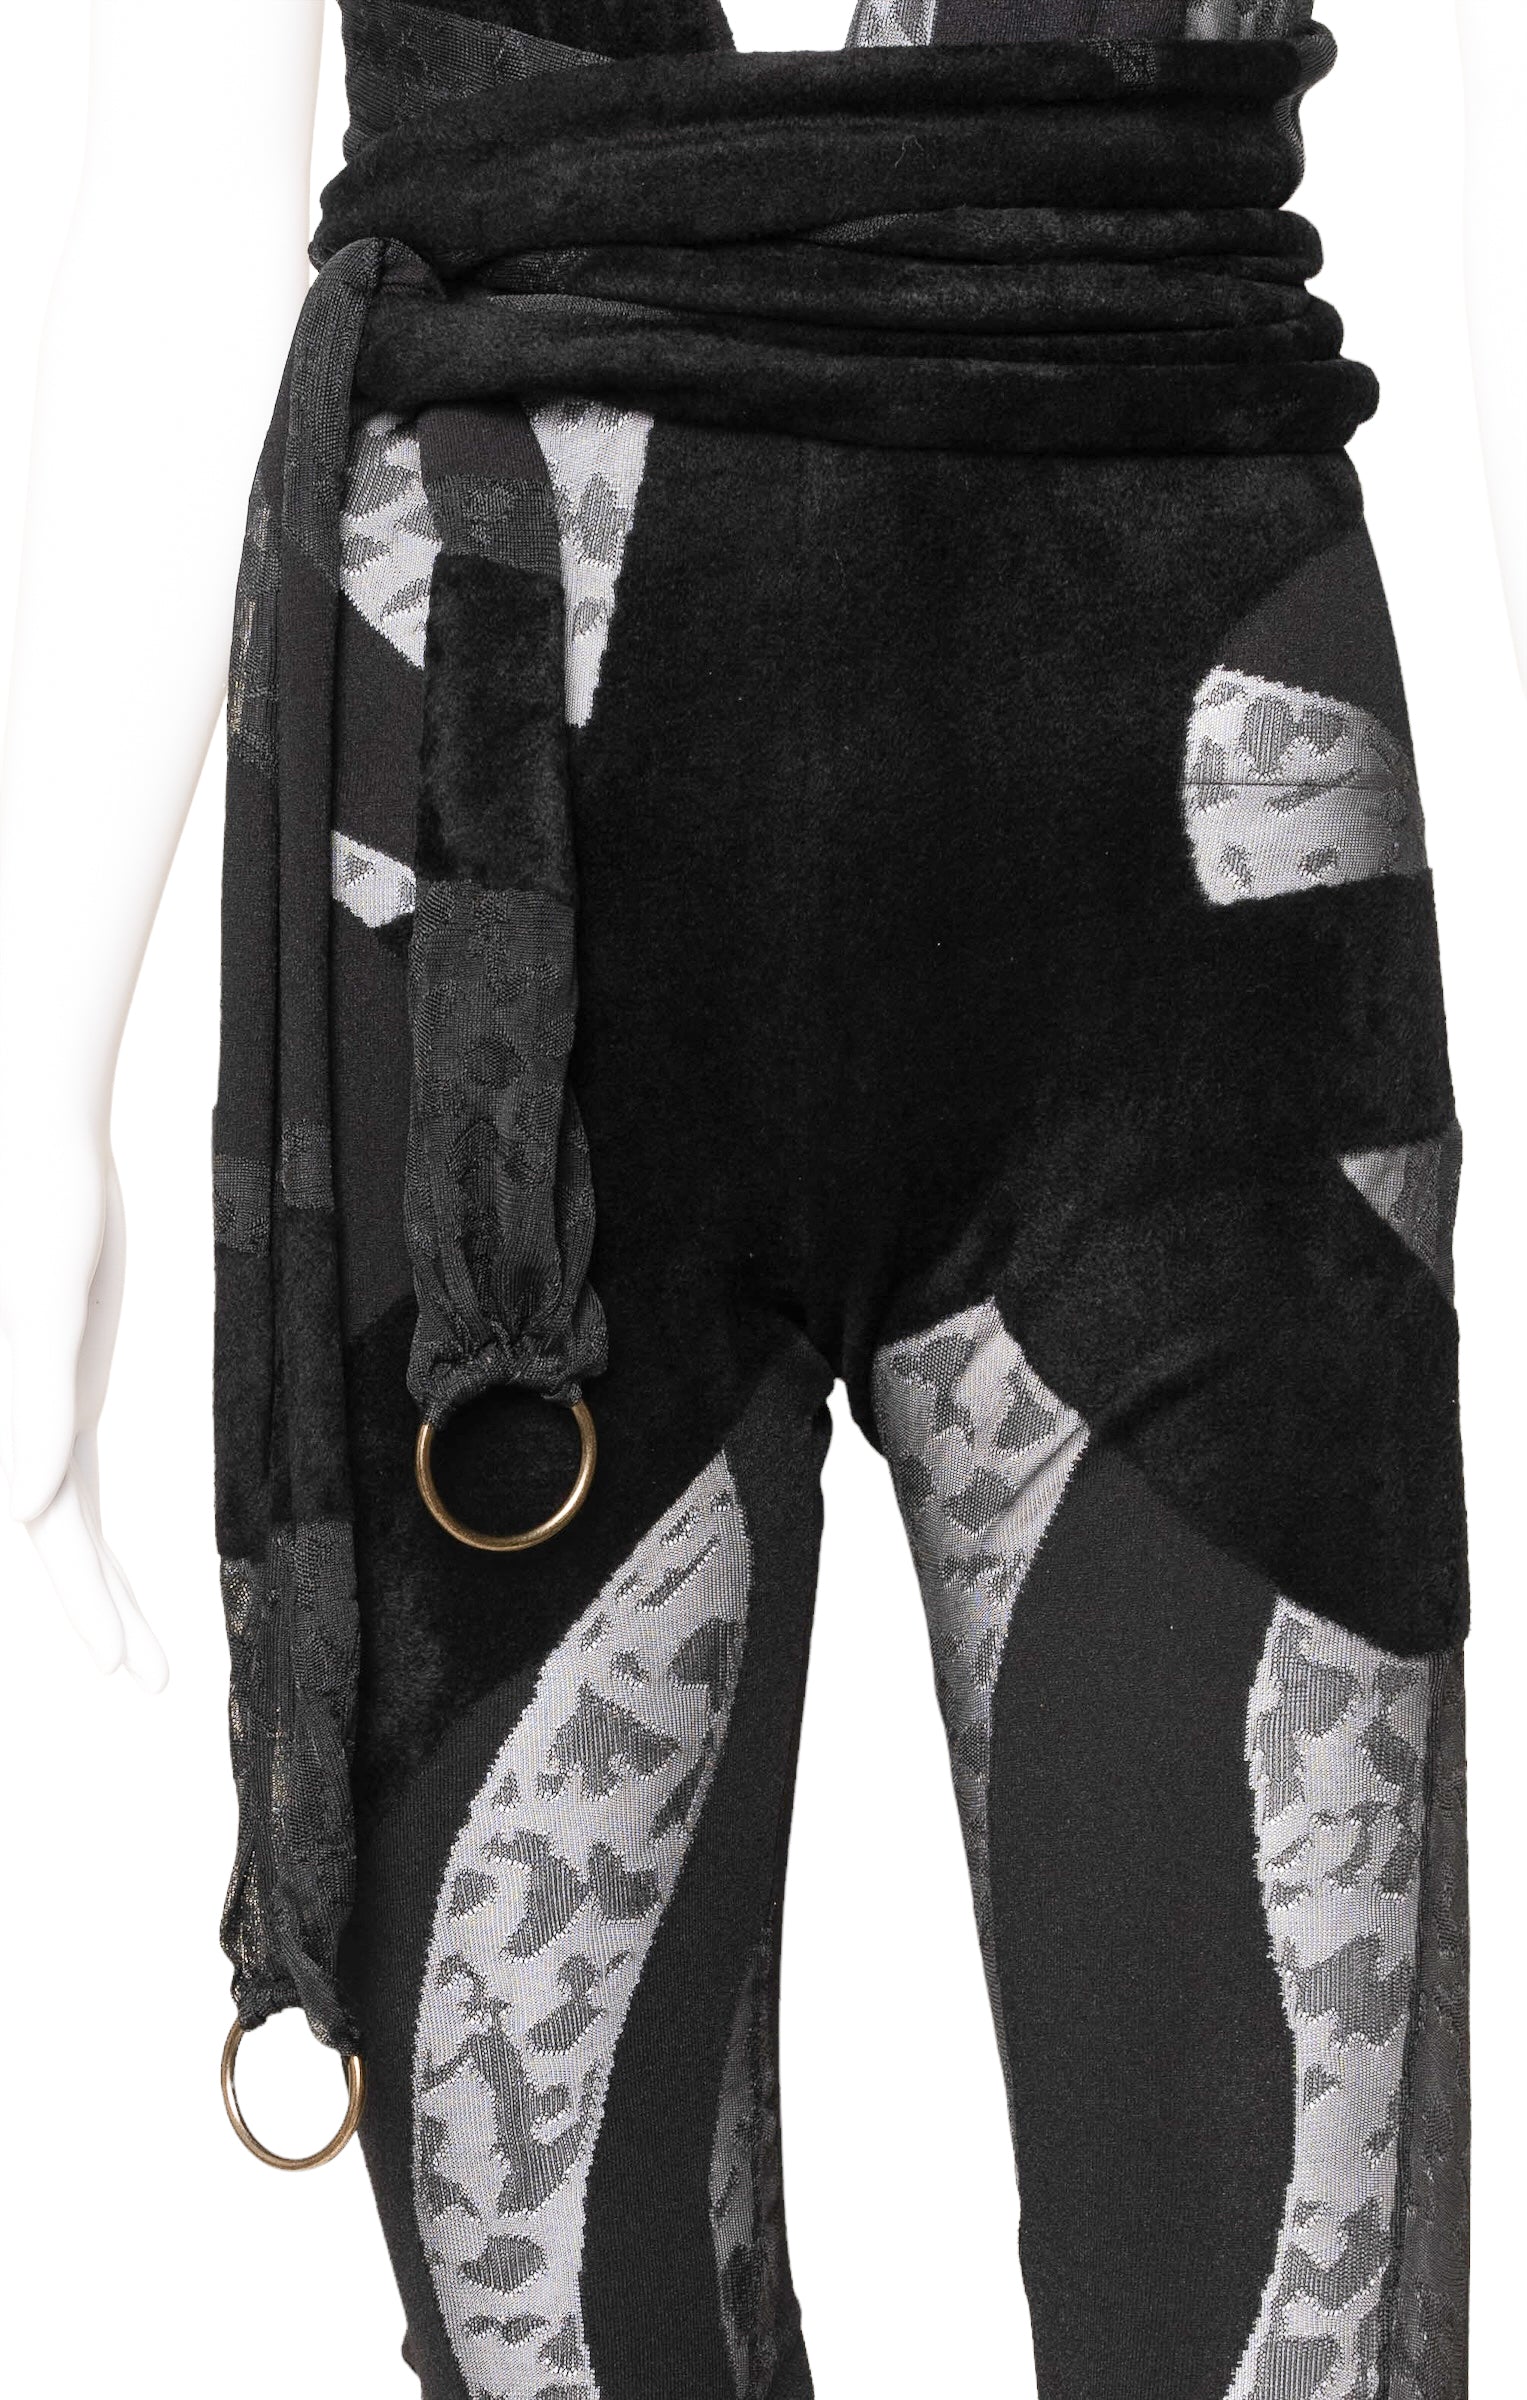 ROBERTO CAVALLI (RARE) Jumpsuit Size: IT 42 / Comparable to US 4-6